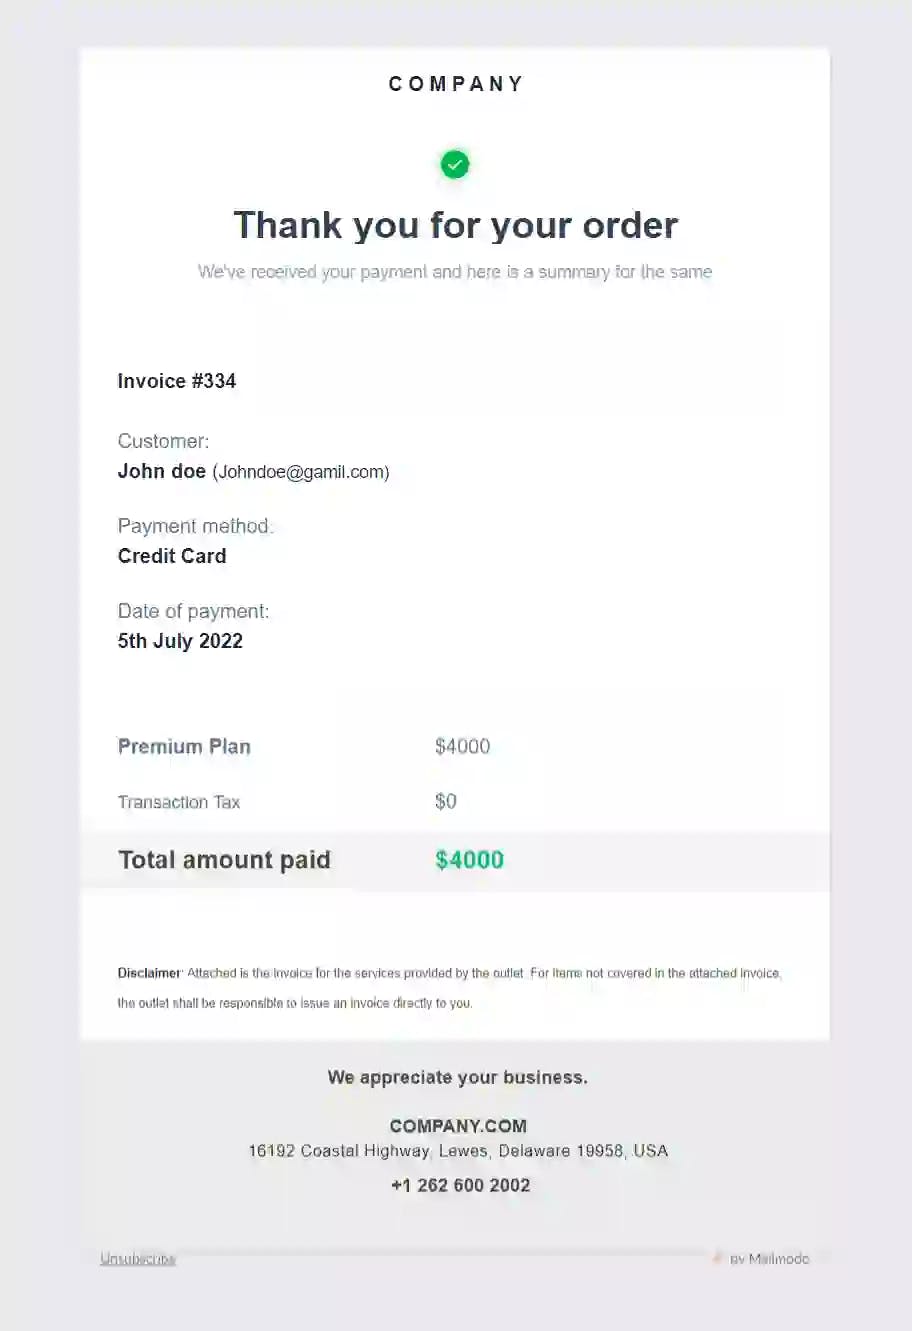 Invoice Email Template for SaaS